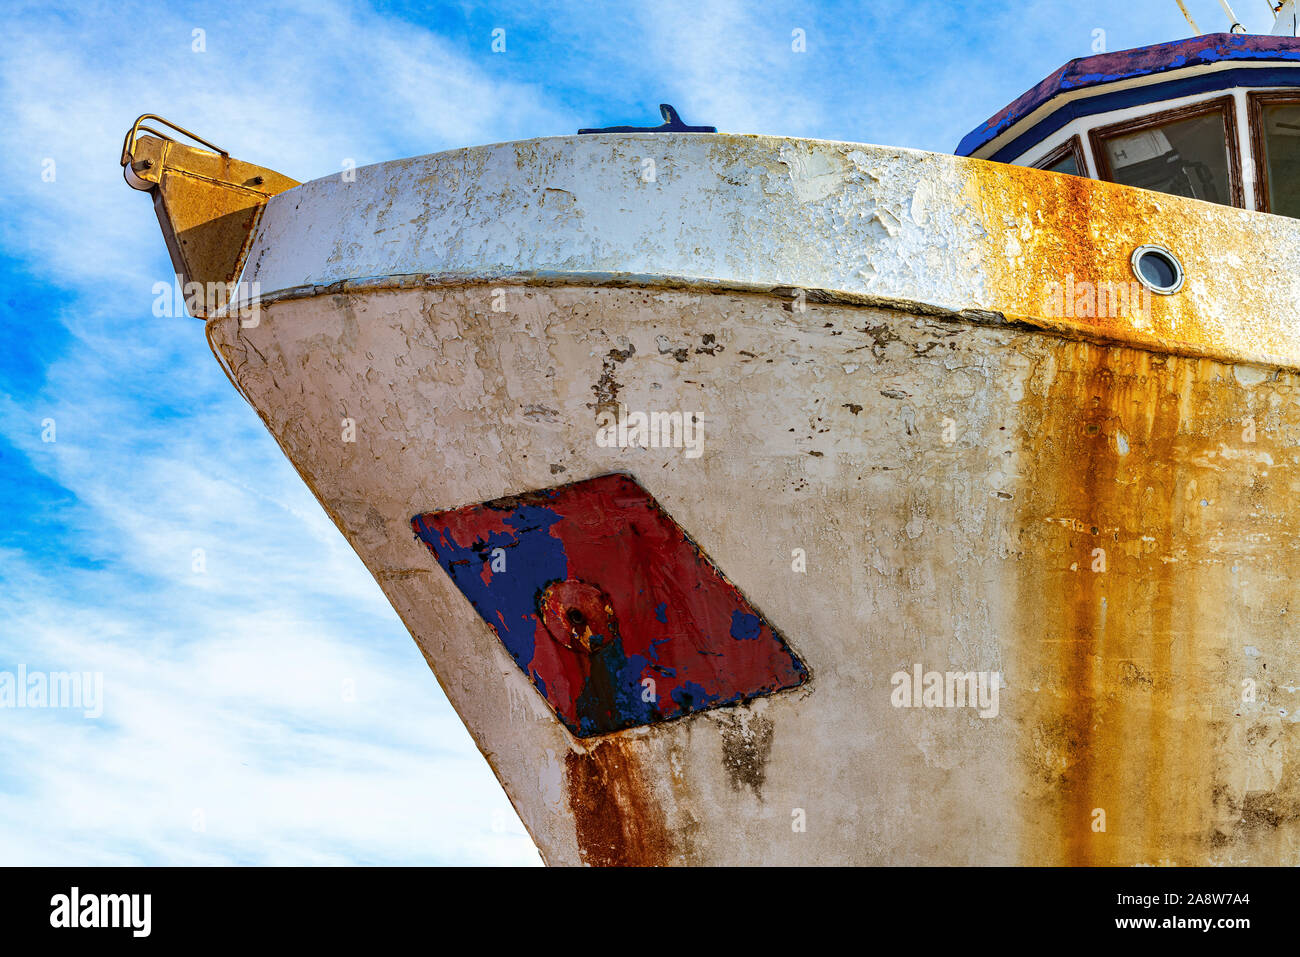 prow of old rusty ship on a slipway on the shore Stock Photo